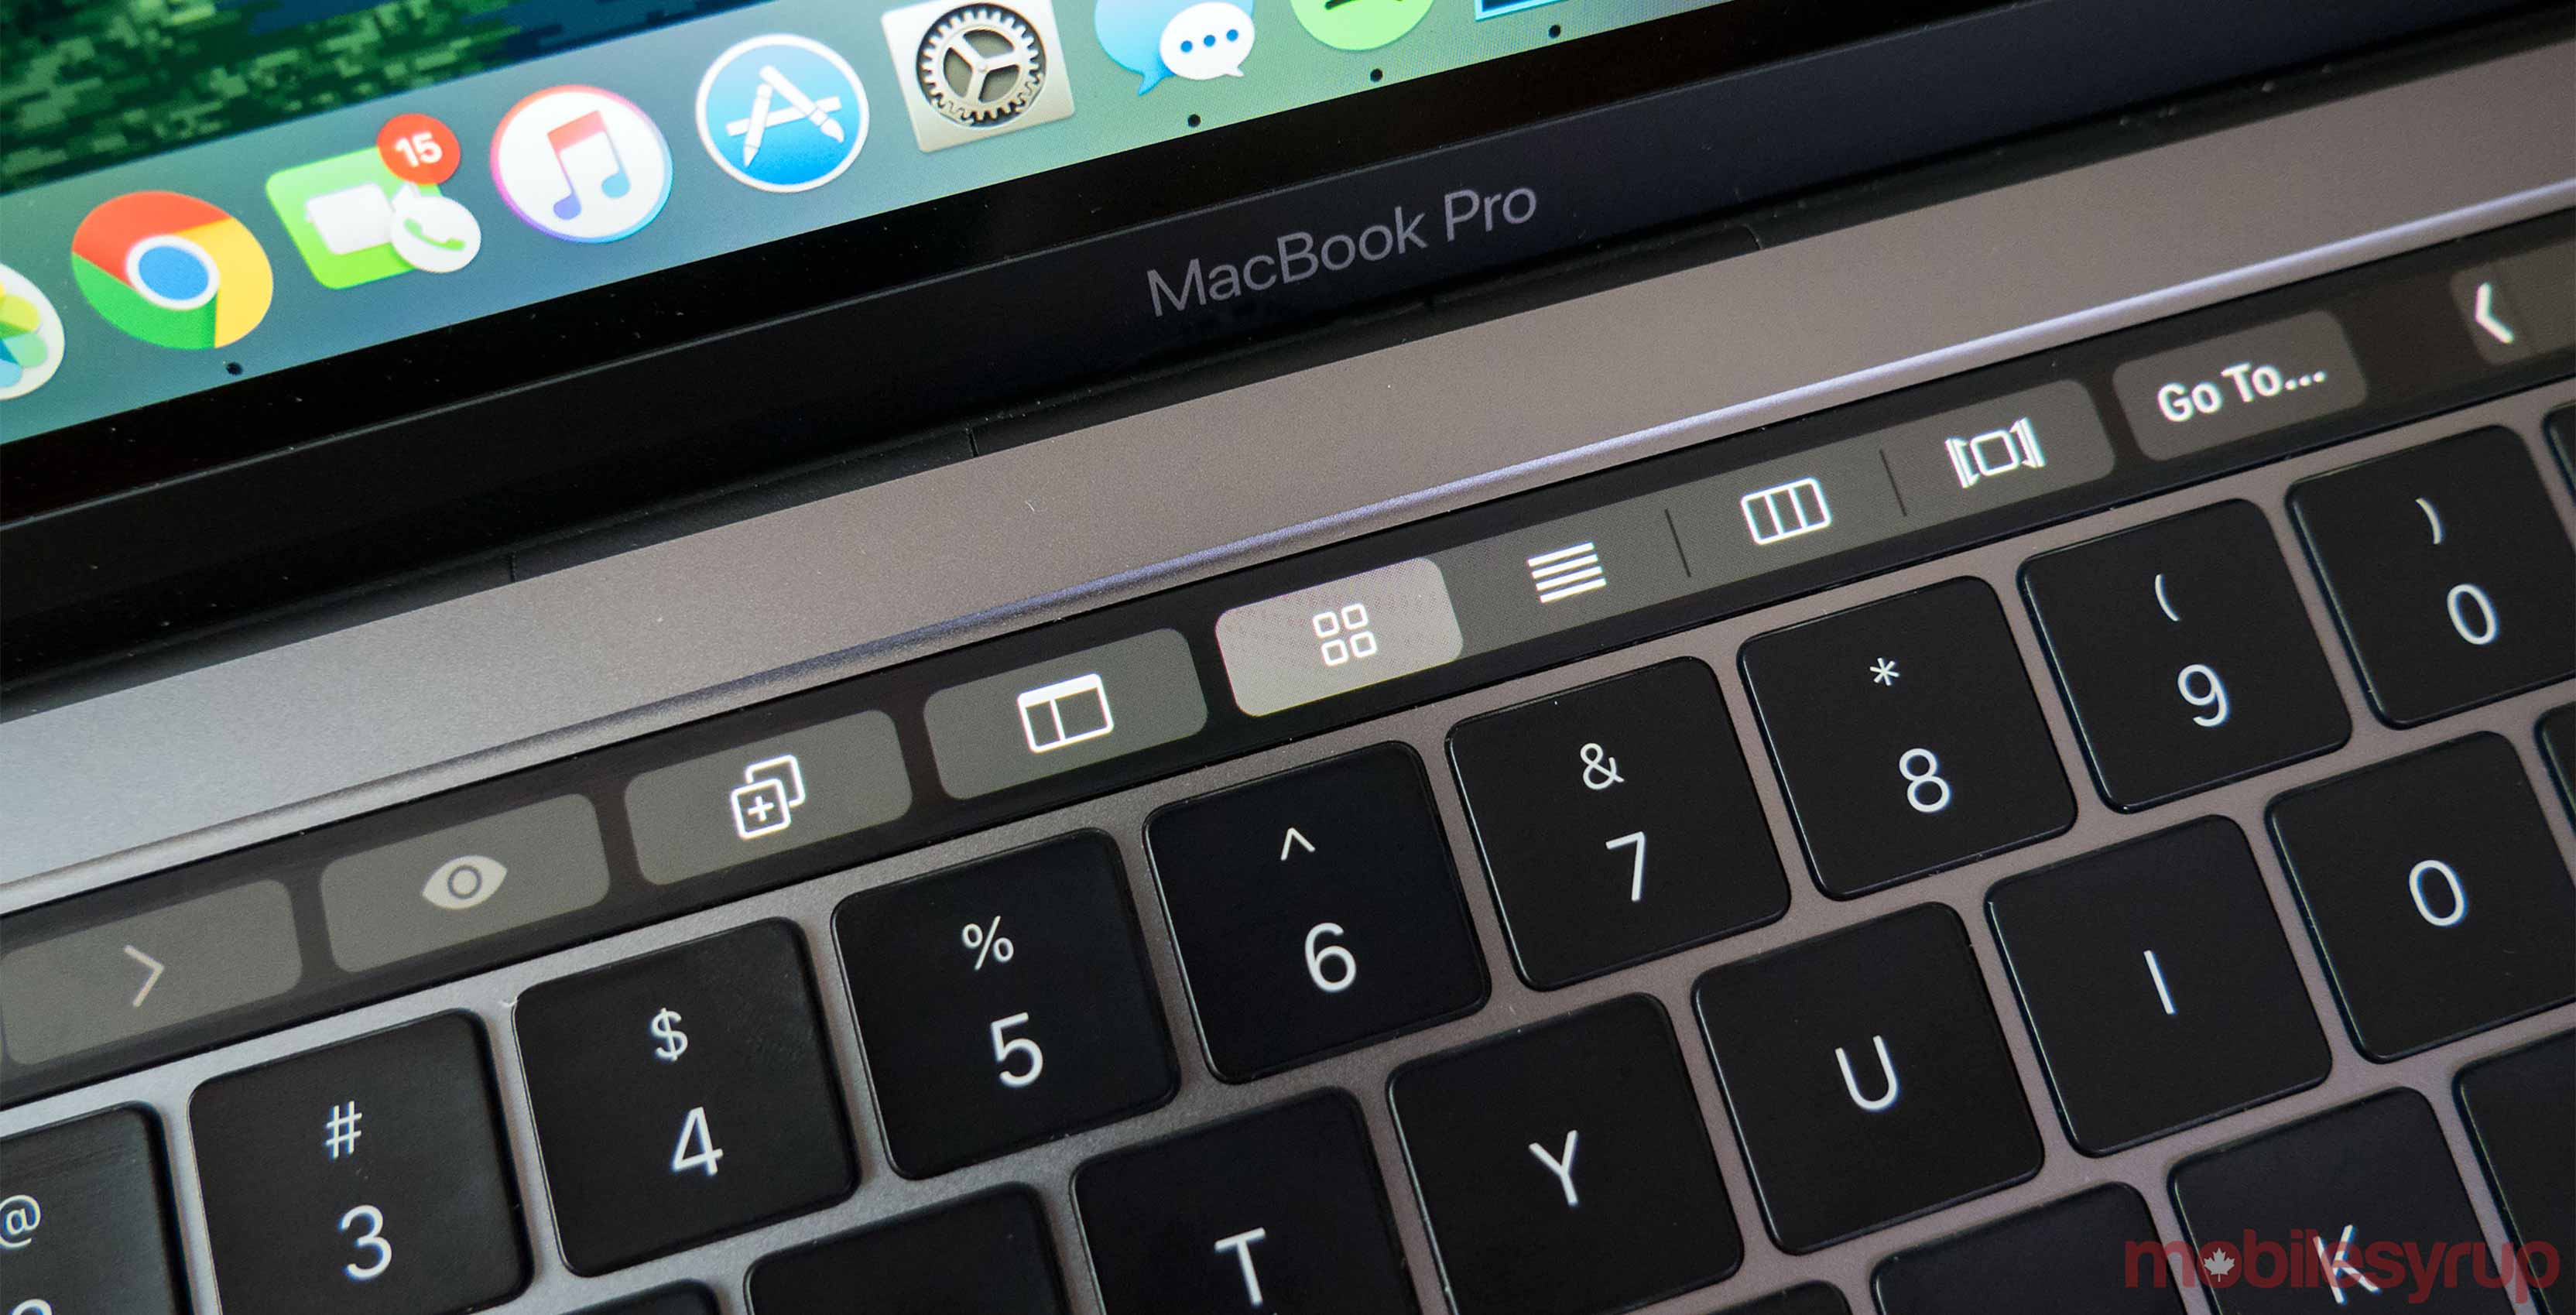 Office for Mac now supports Apple's USB-C MacBook Pro with Touch Bar